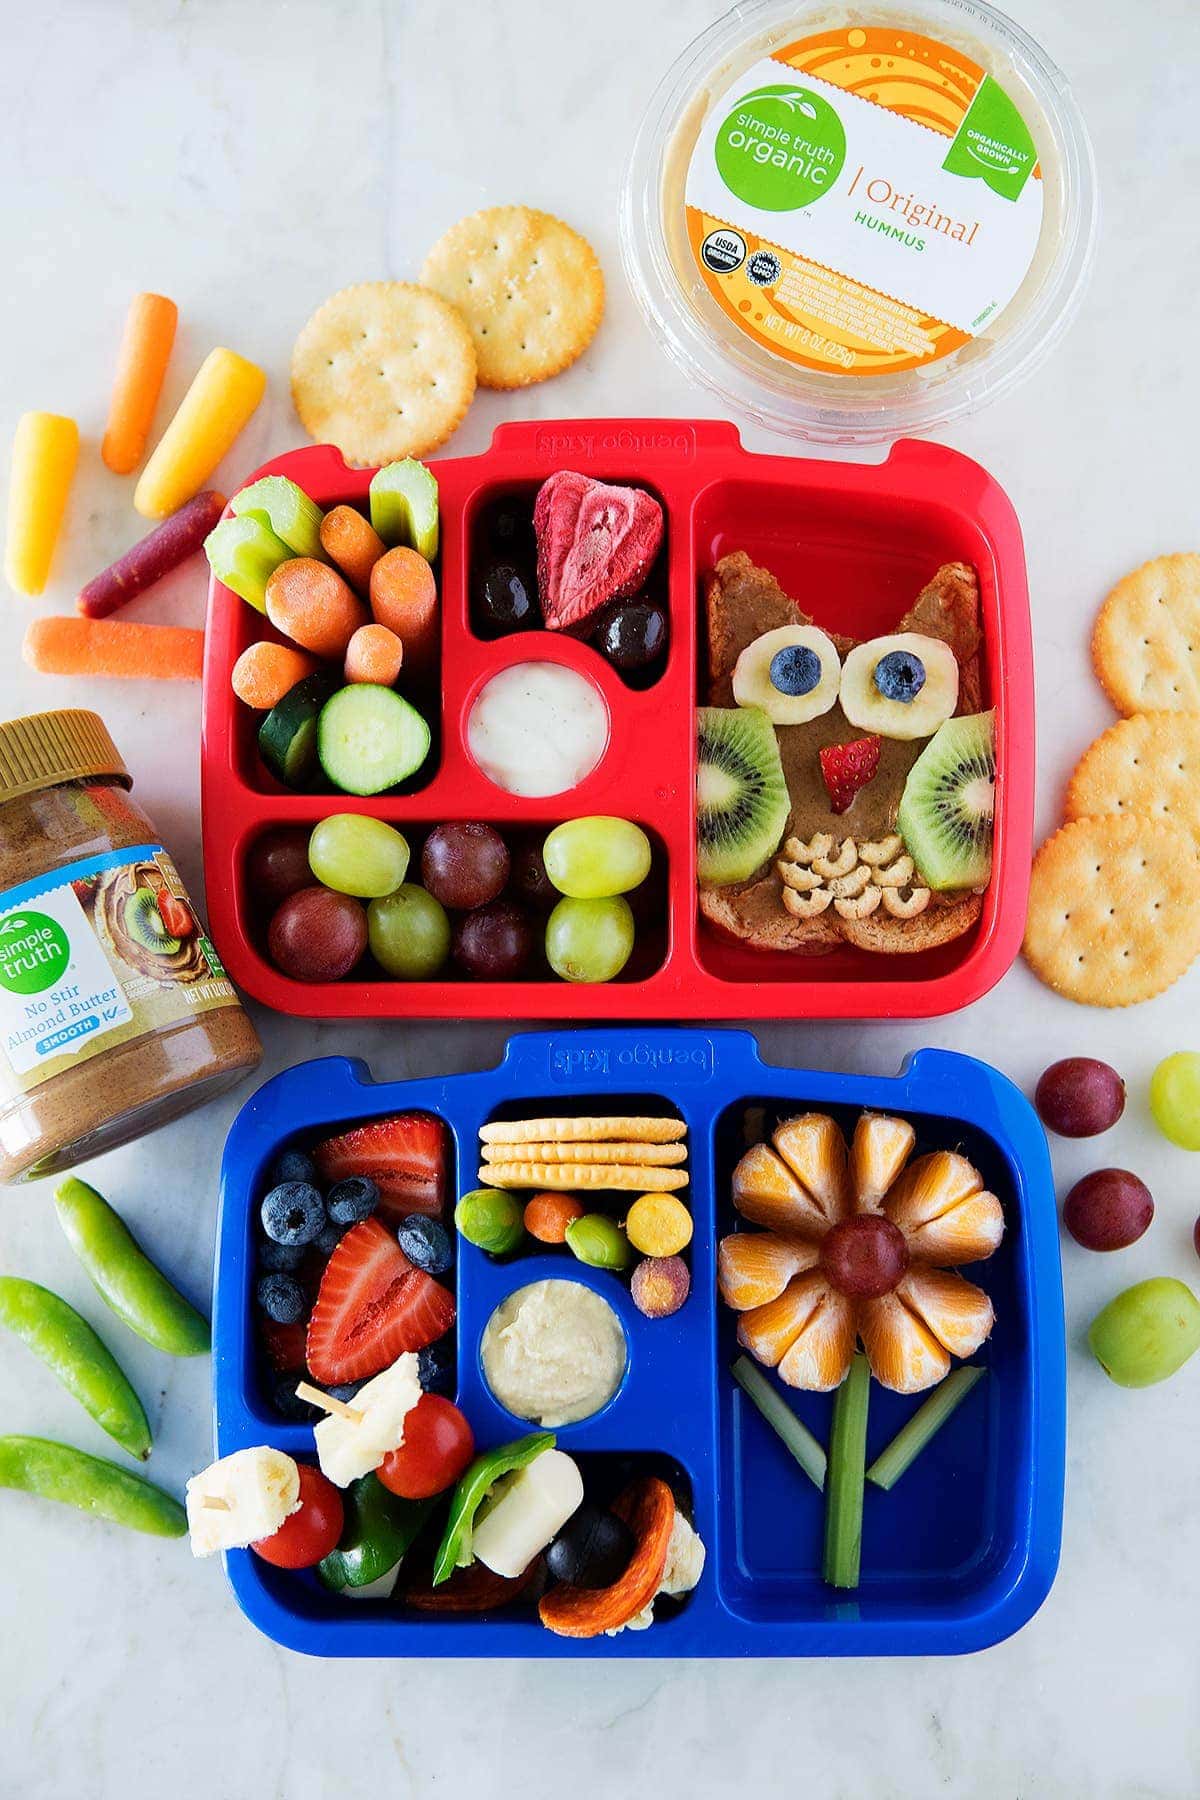 Best Toddler and Kids Lunch Box